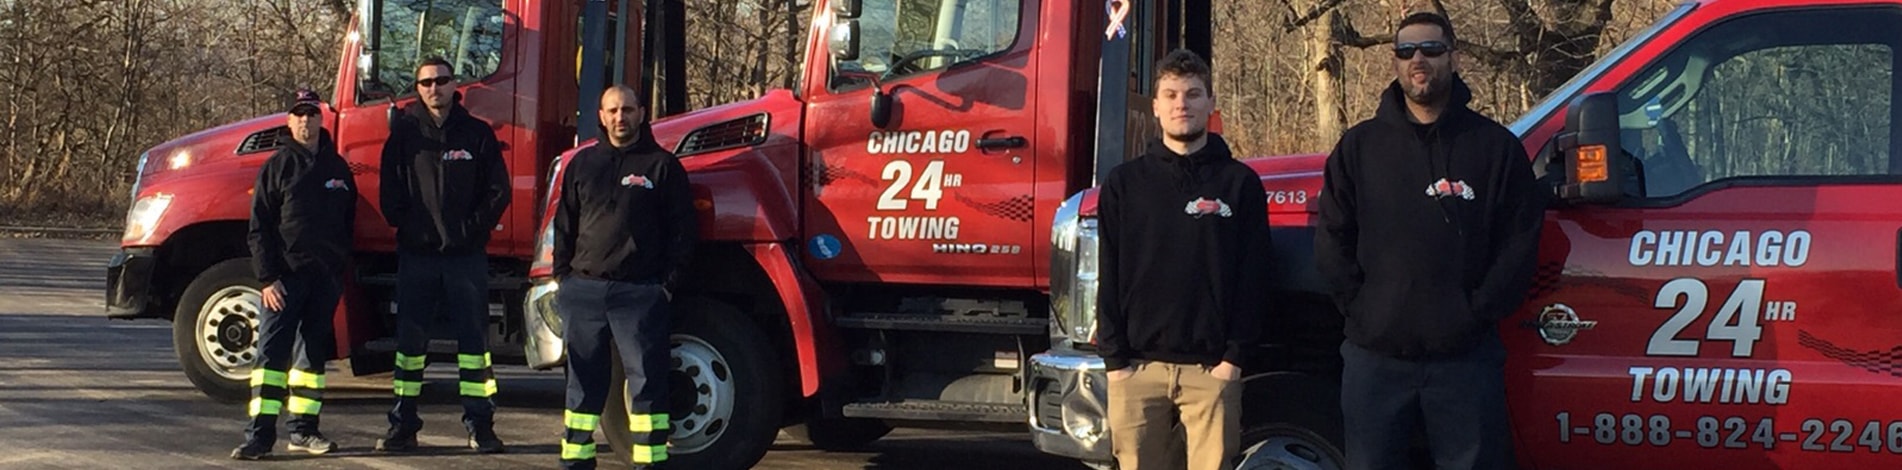 Jump Start Car Chicago (773) 681-9670 | Chicago Towing is a A ...